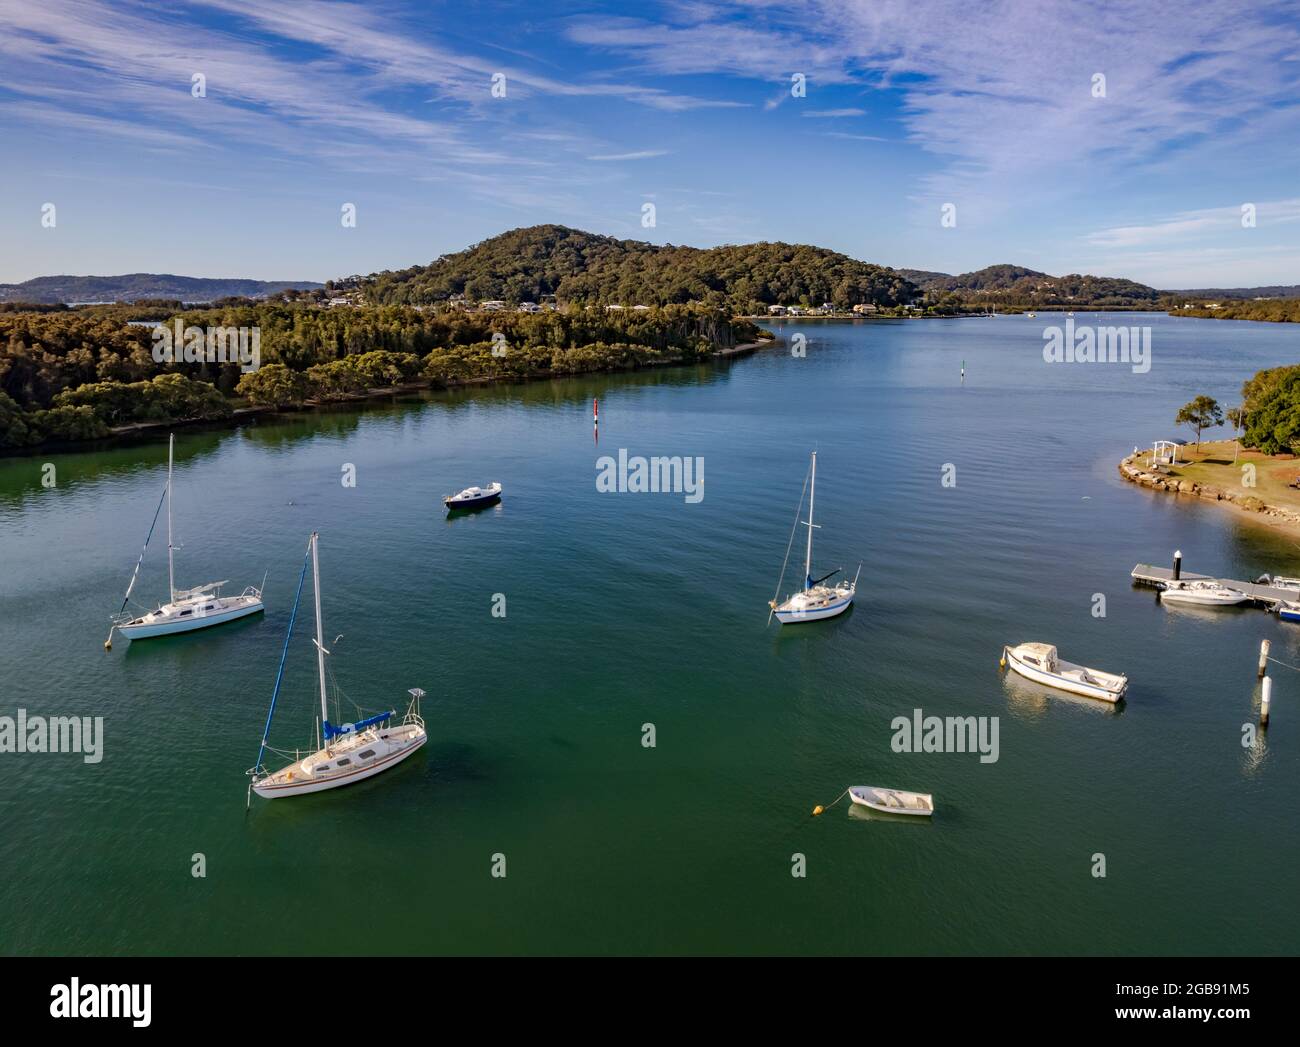 A scenic flight over the channel at Woy Woy, NSW, Australia. Stock Photo